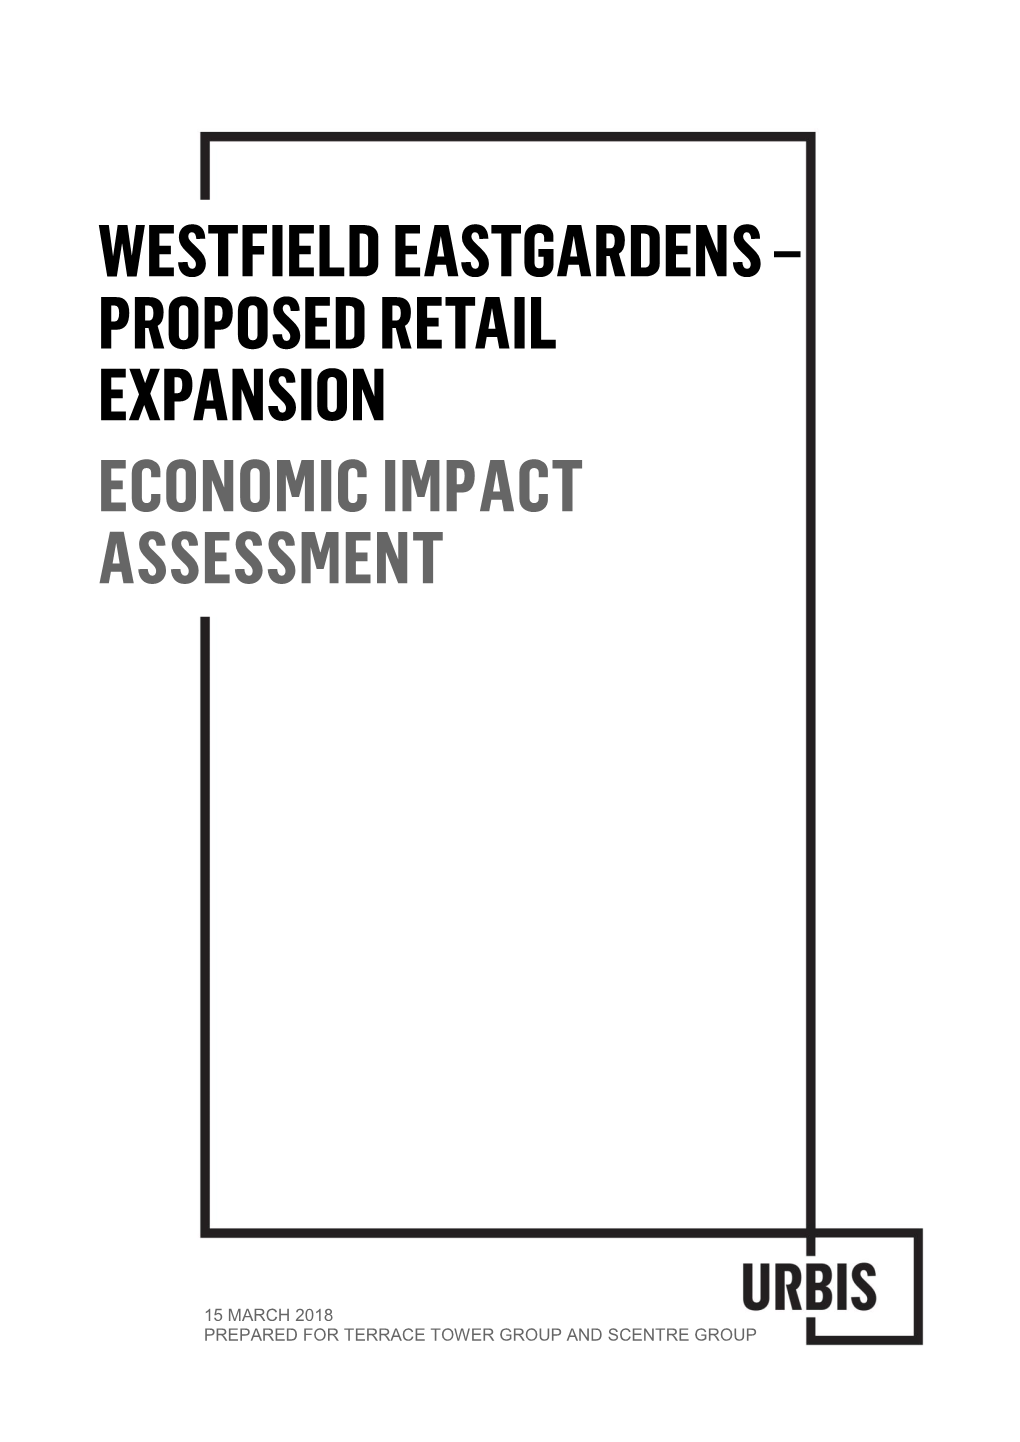 Westfield Eastgardens – Proposed Retail Expansion Economic Impact Assessment